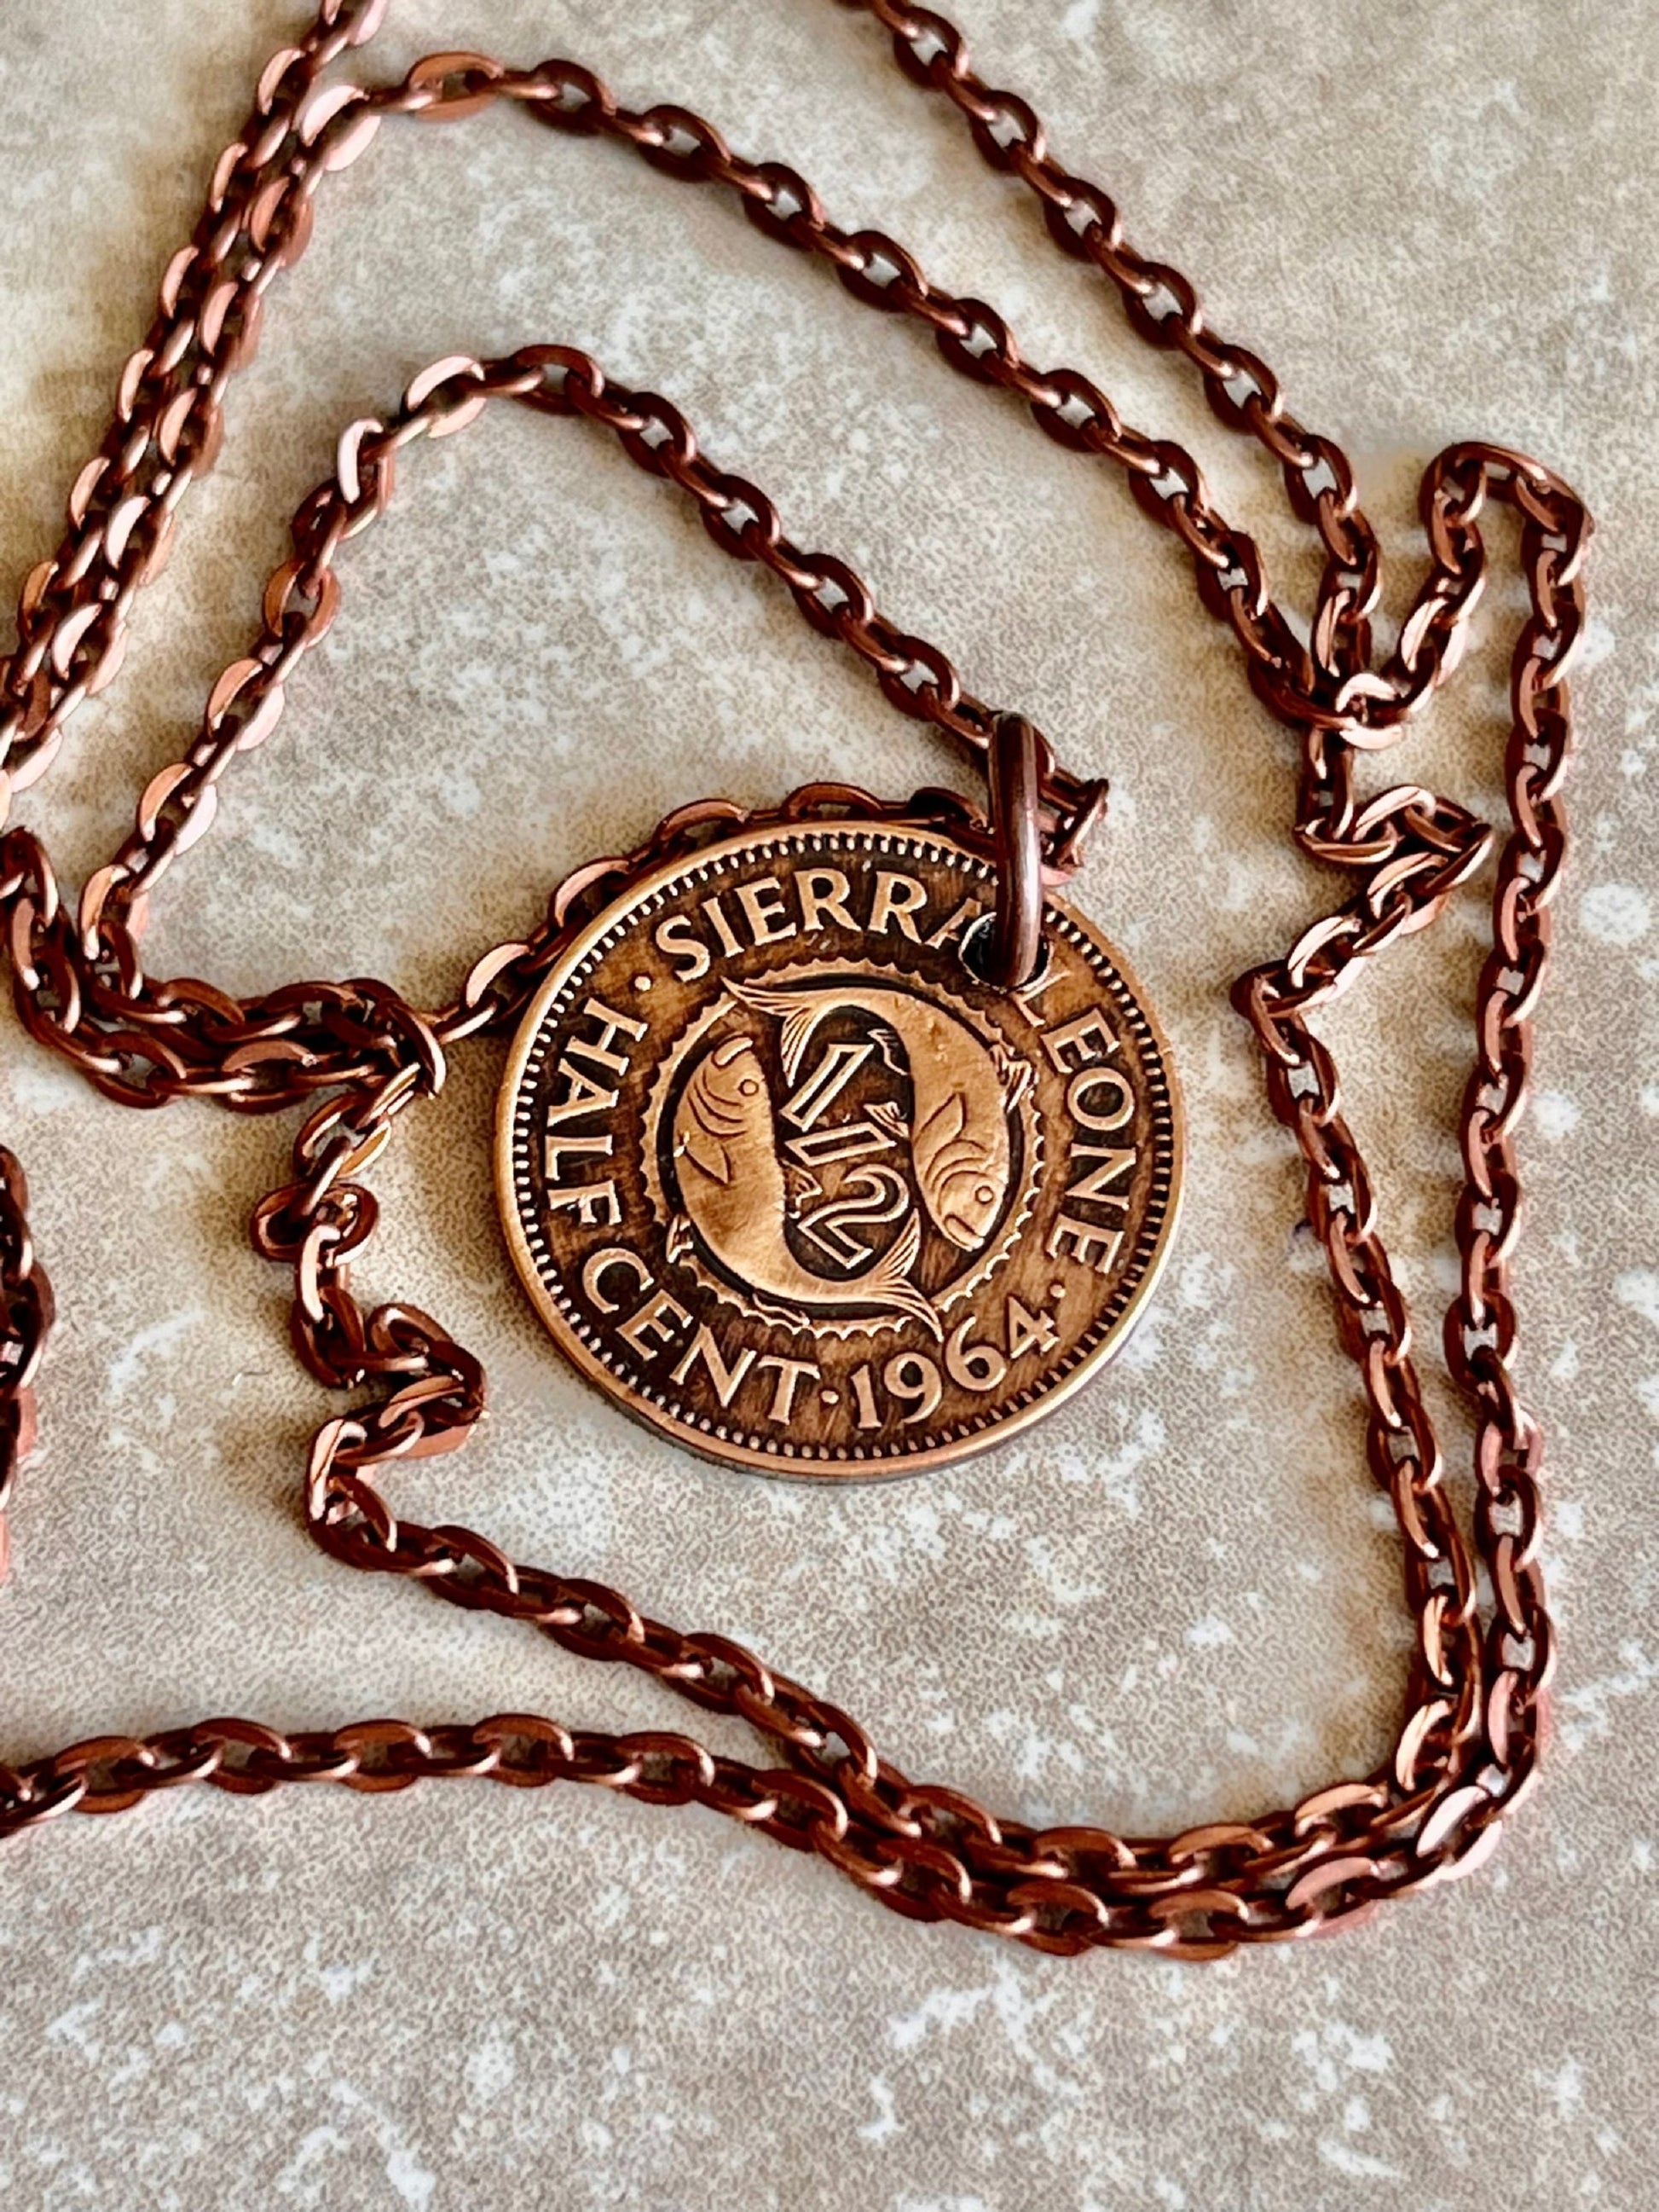 Sierra Leone Coin Pendant African Half Cent Personal Necklace Vintage Handmade Jewelry Gift Friend Charm For Him Her World Coin Collector